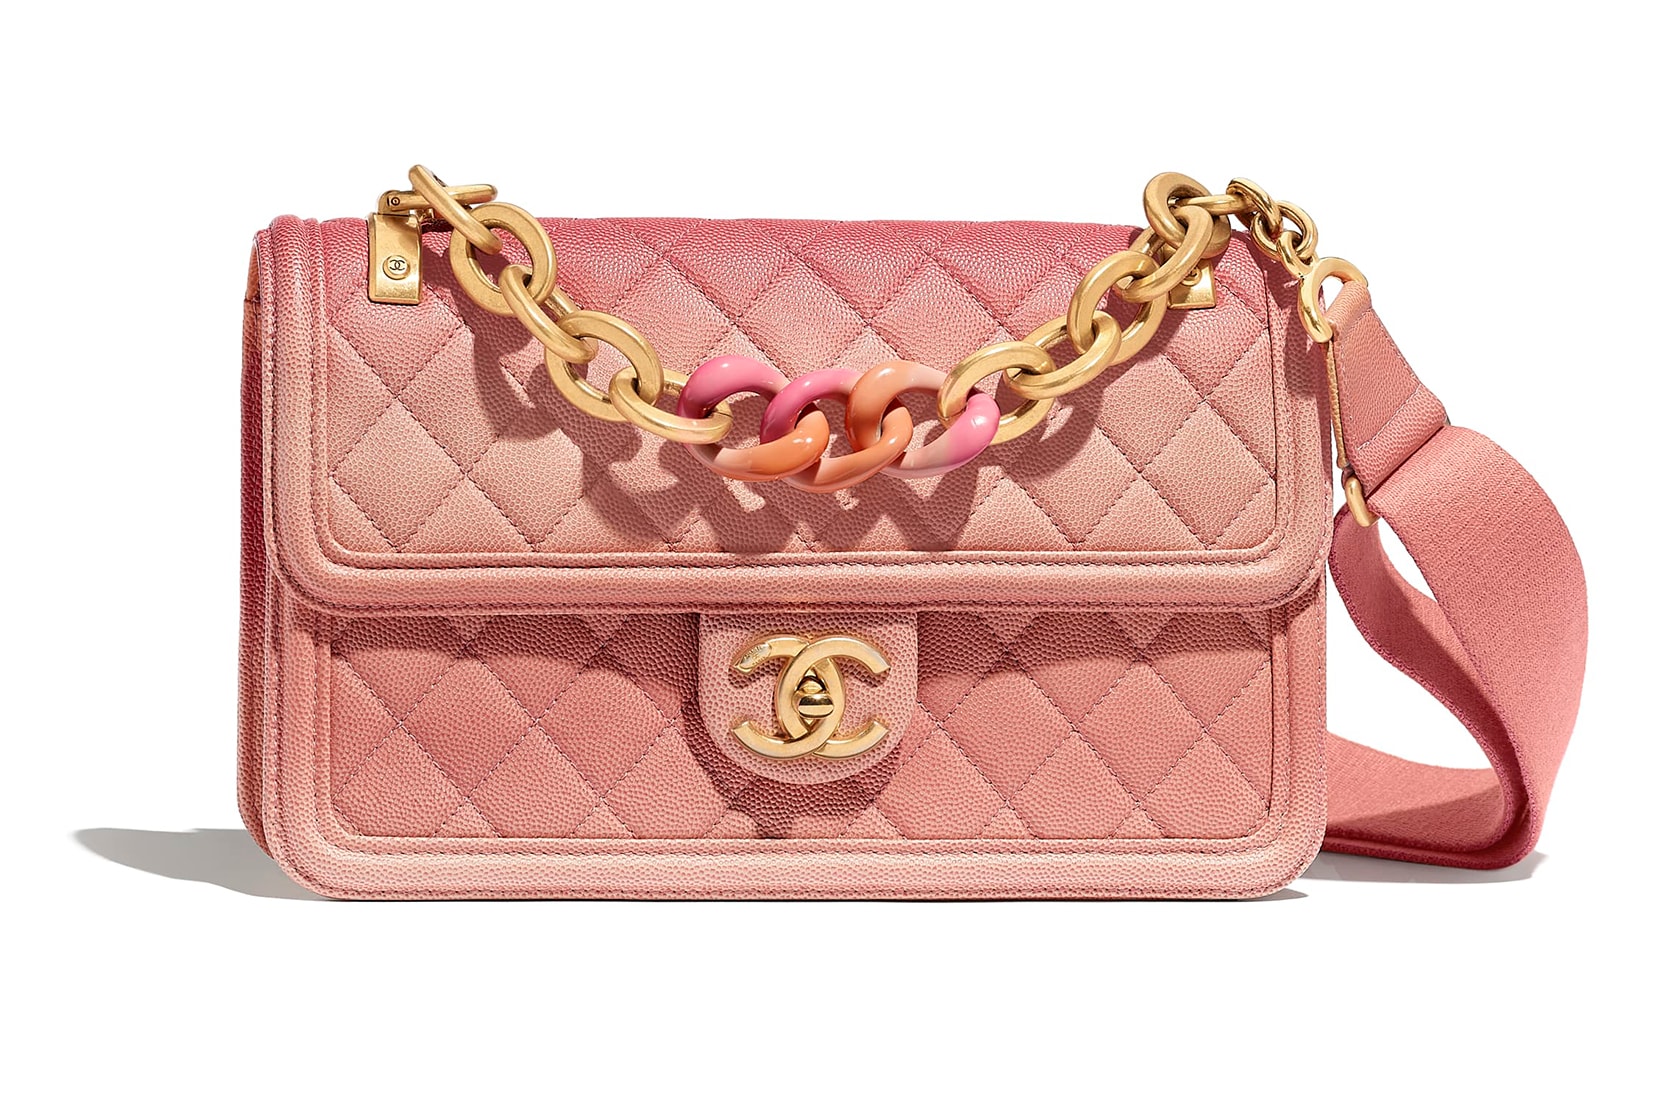 Chanel Coral Pink Ombré Quilted Flap Bag